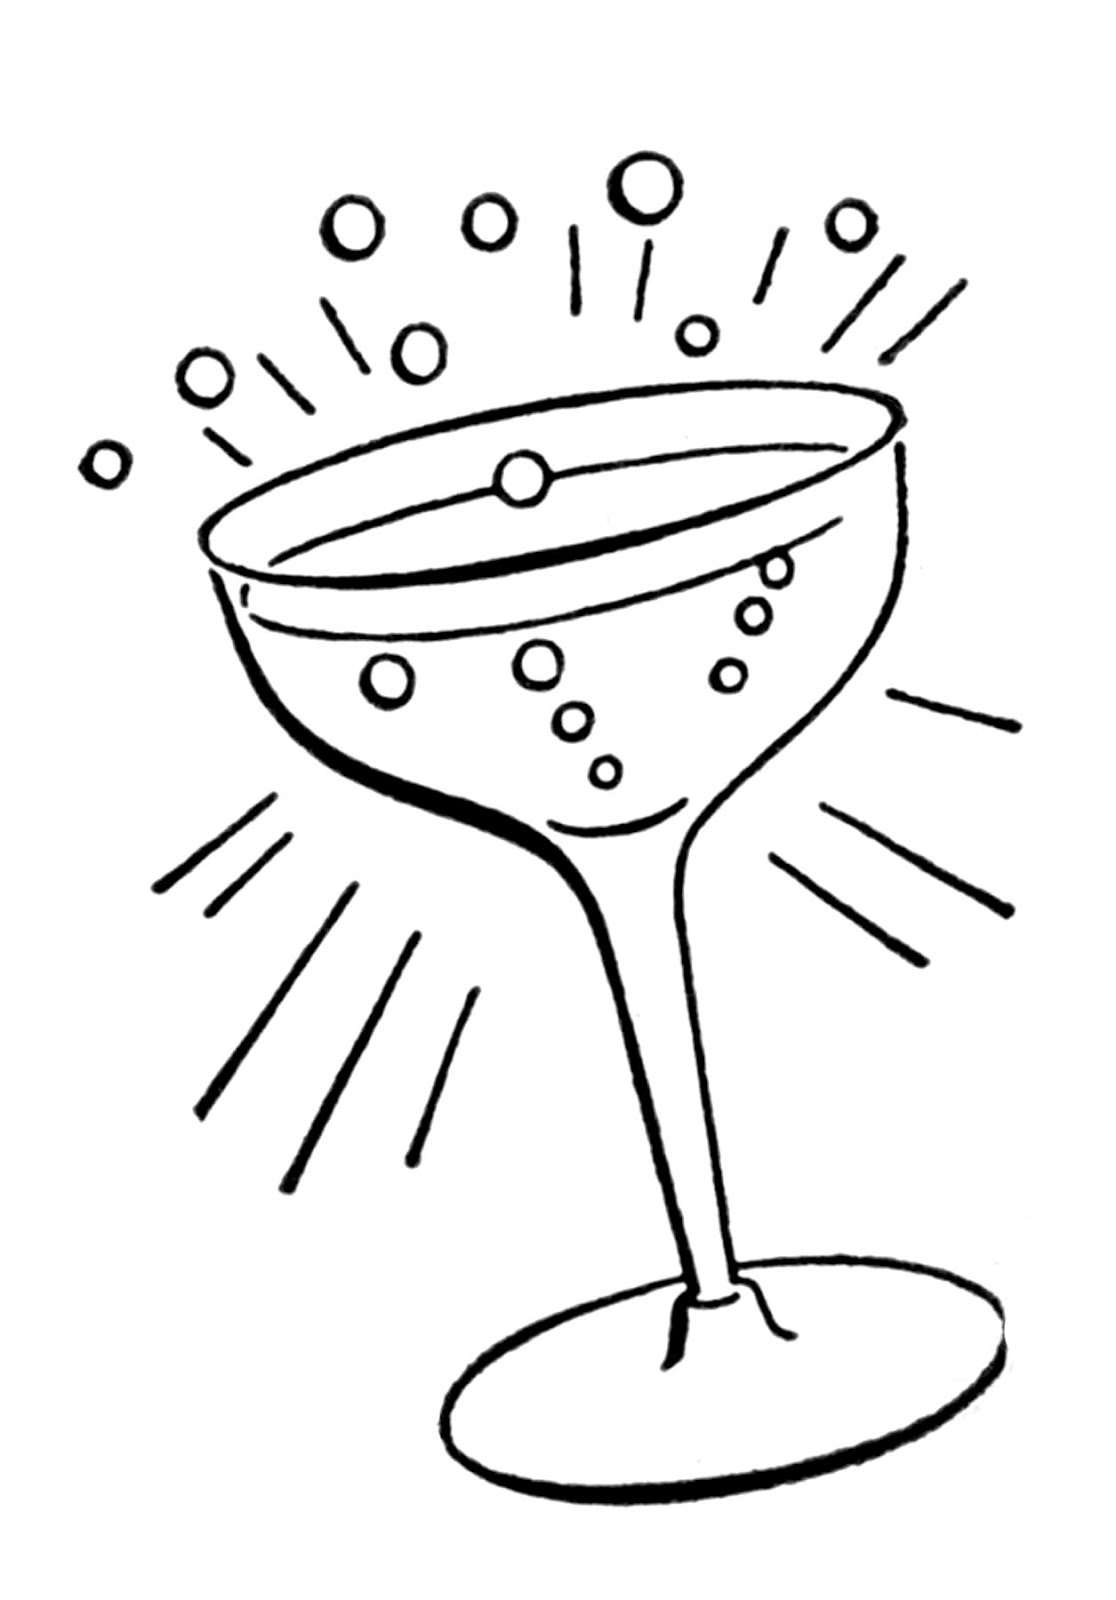 Retro line drawings cocktail glass the graphics fairy clip art